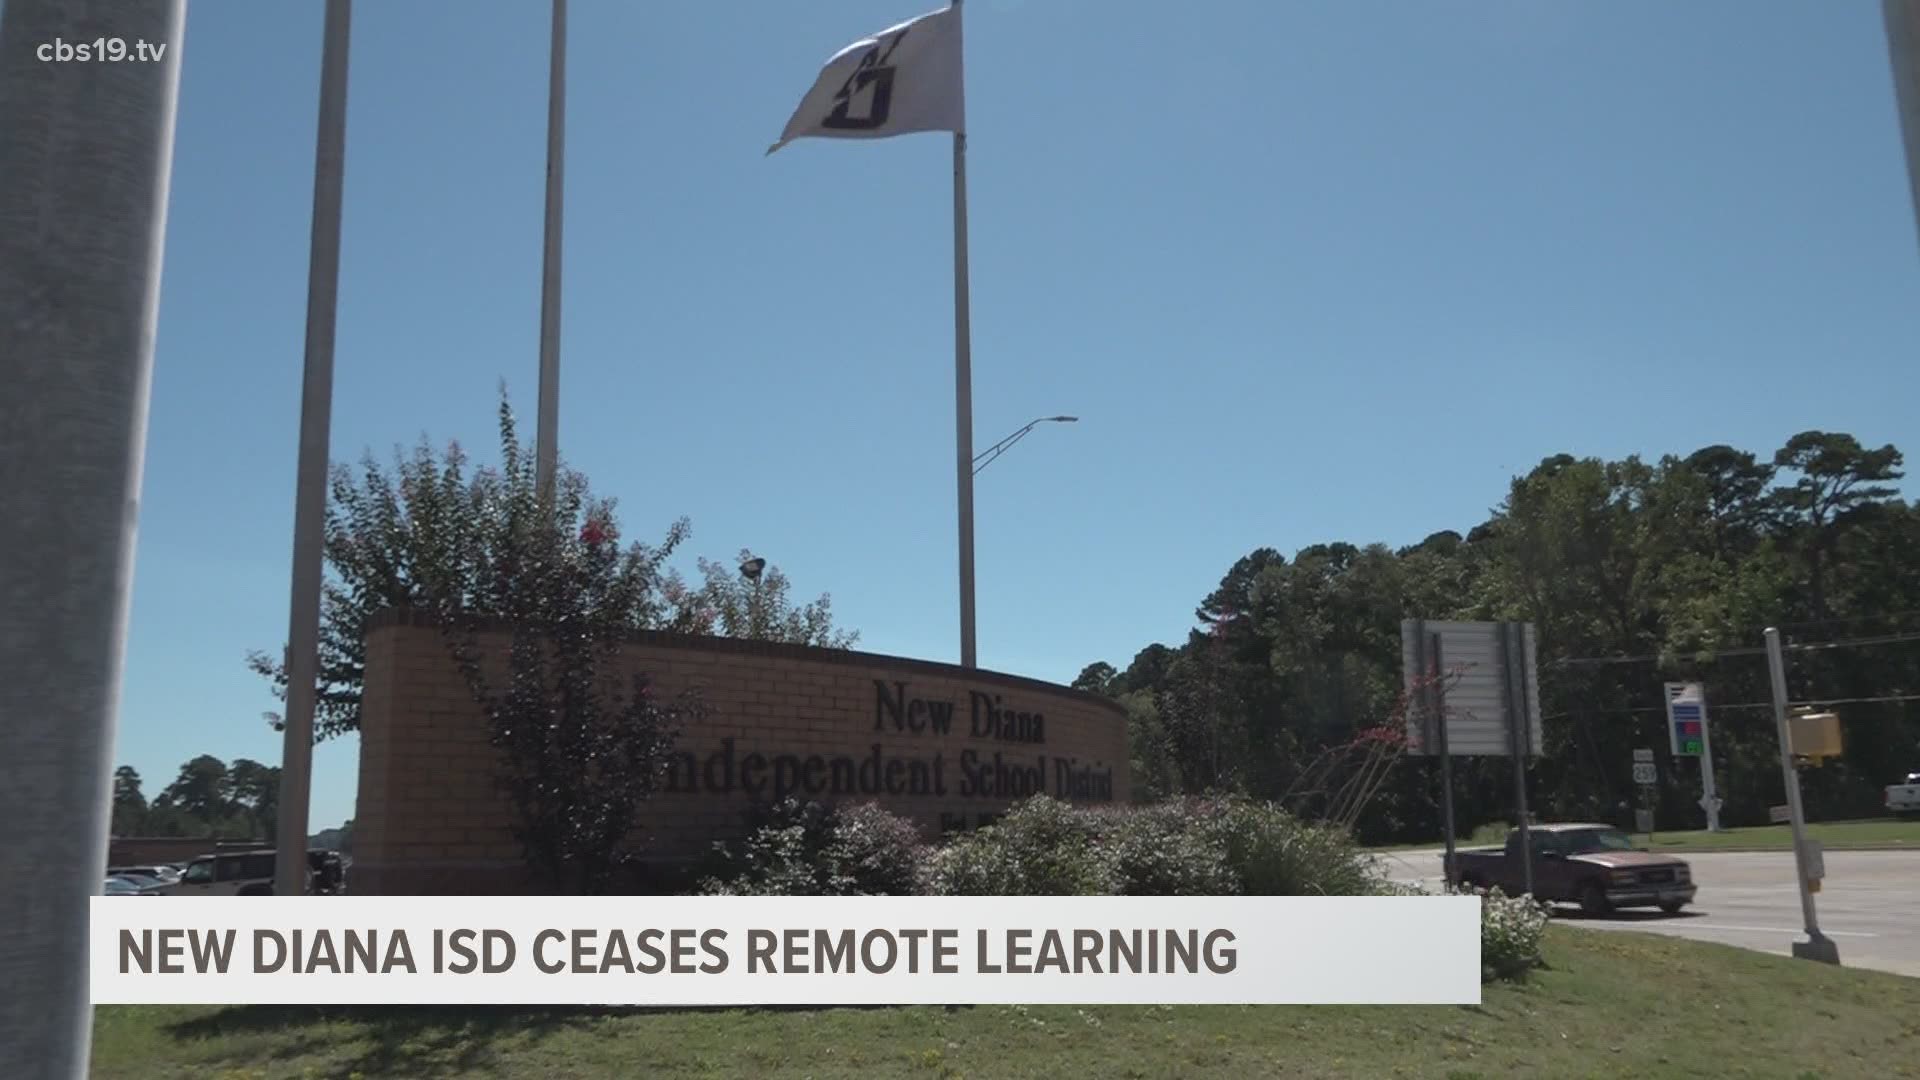 The New Diana Independent School District Board of Trustees moves to cease remote learning, effective Sept. 29.